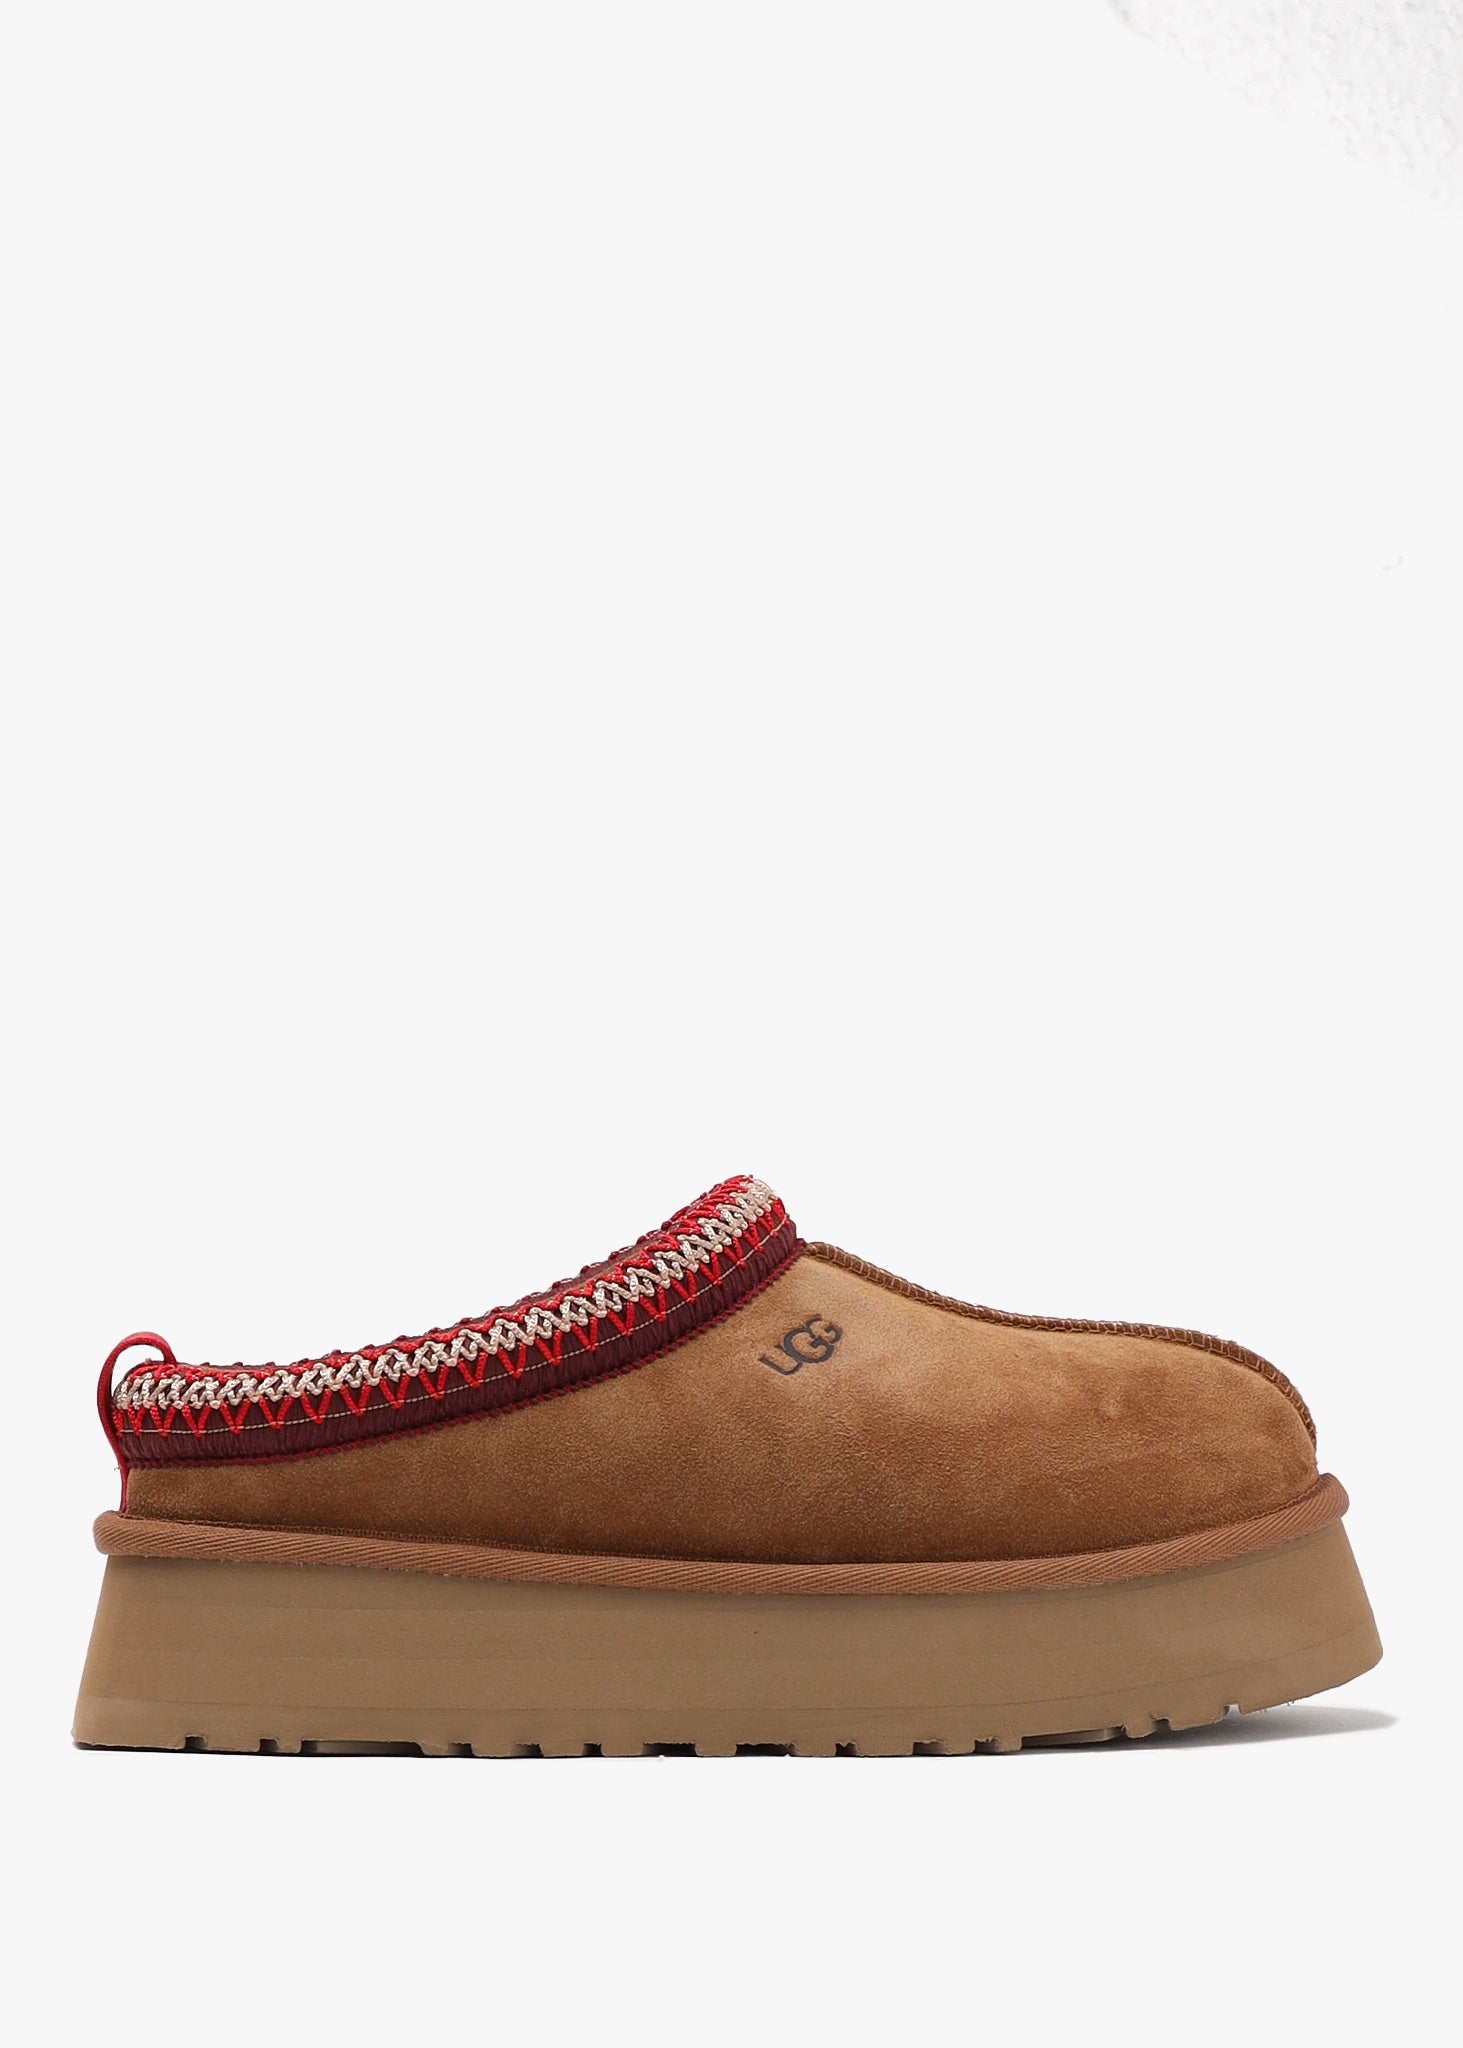 Ugg Womens Tazz Platform Slipper With Embroidery In Chestnut - Brown